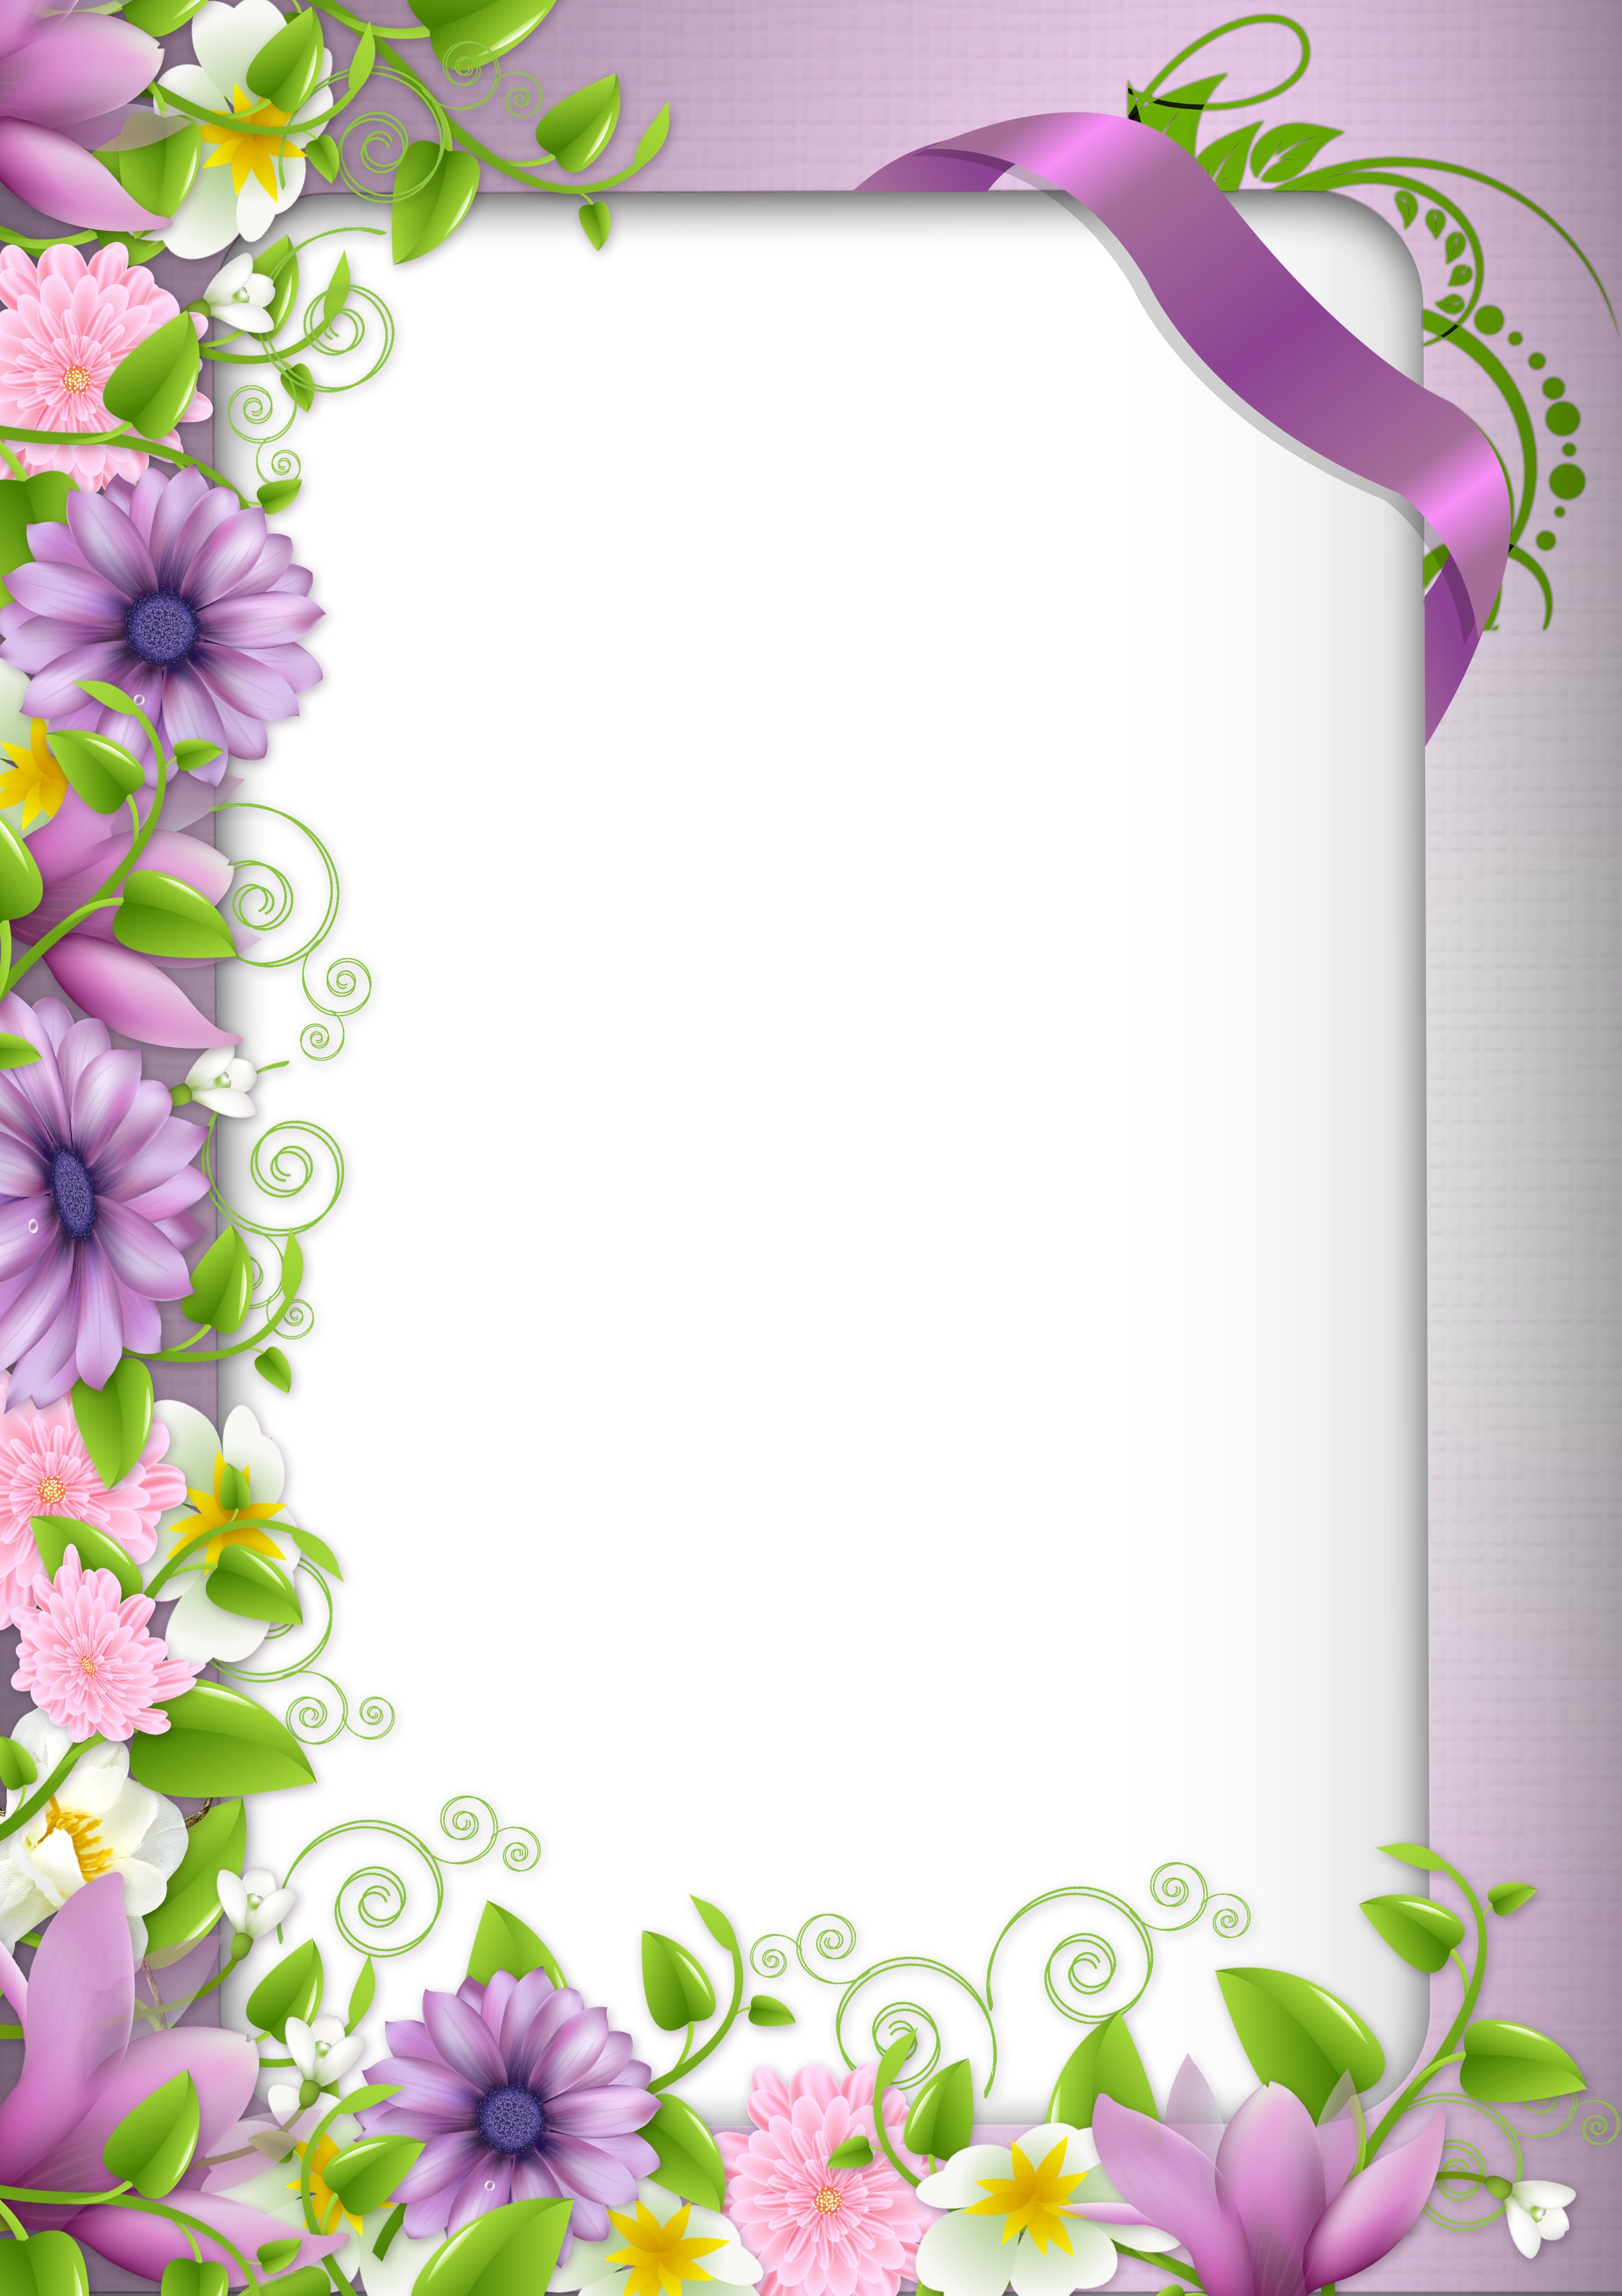 simple floral designs for border